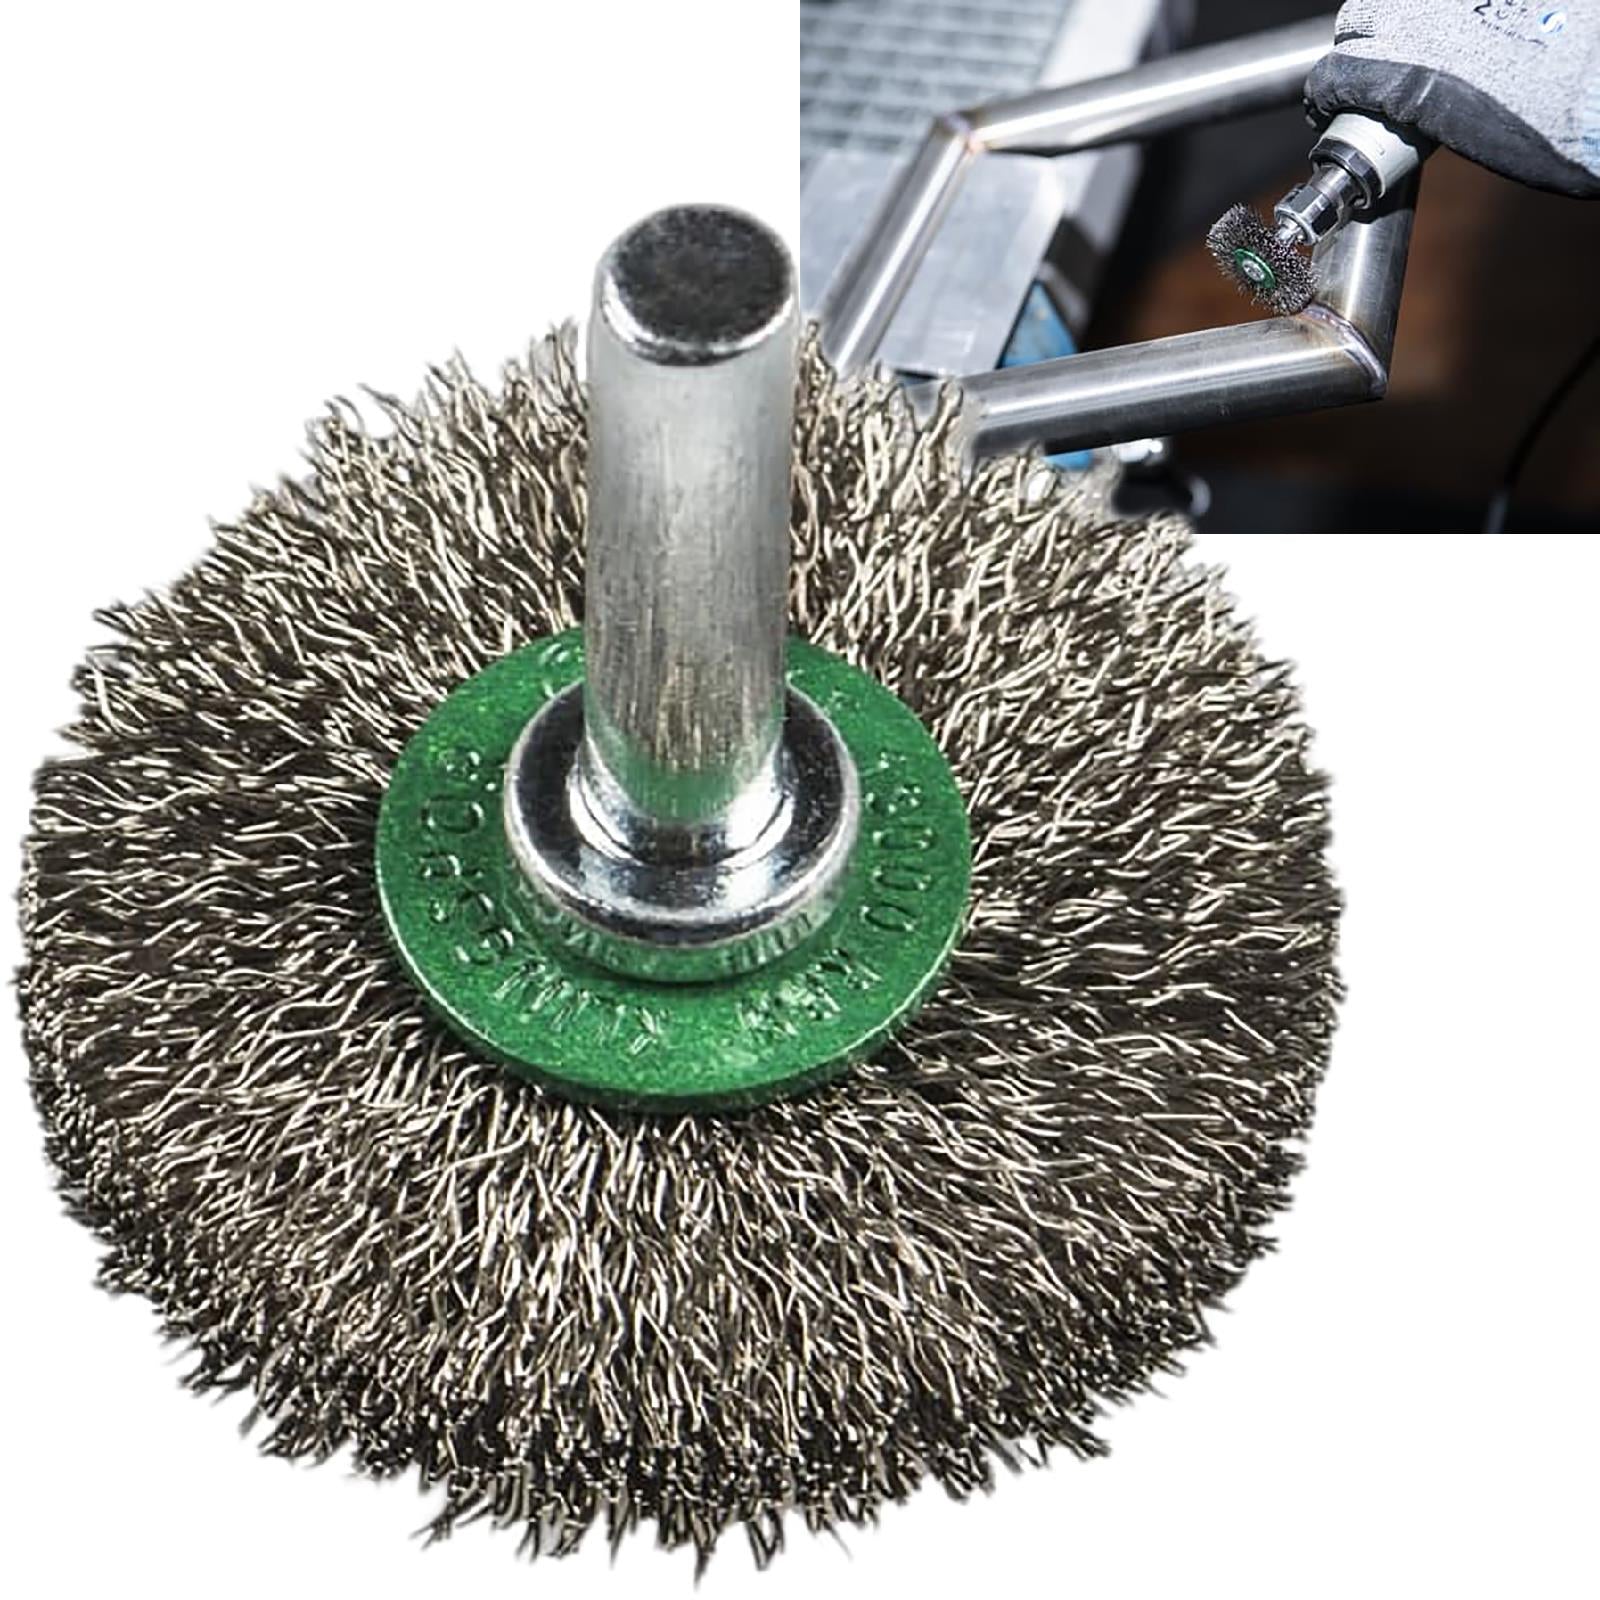 Klingspor Crimped Wire Wheel Brush 30mm 40mm 50mm 60mm 70mm 6mm Shank Stainless Steel BRS600W